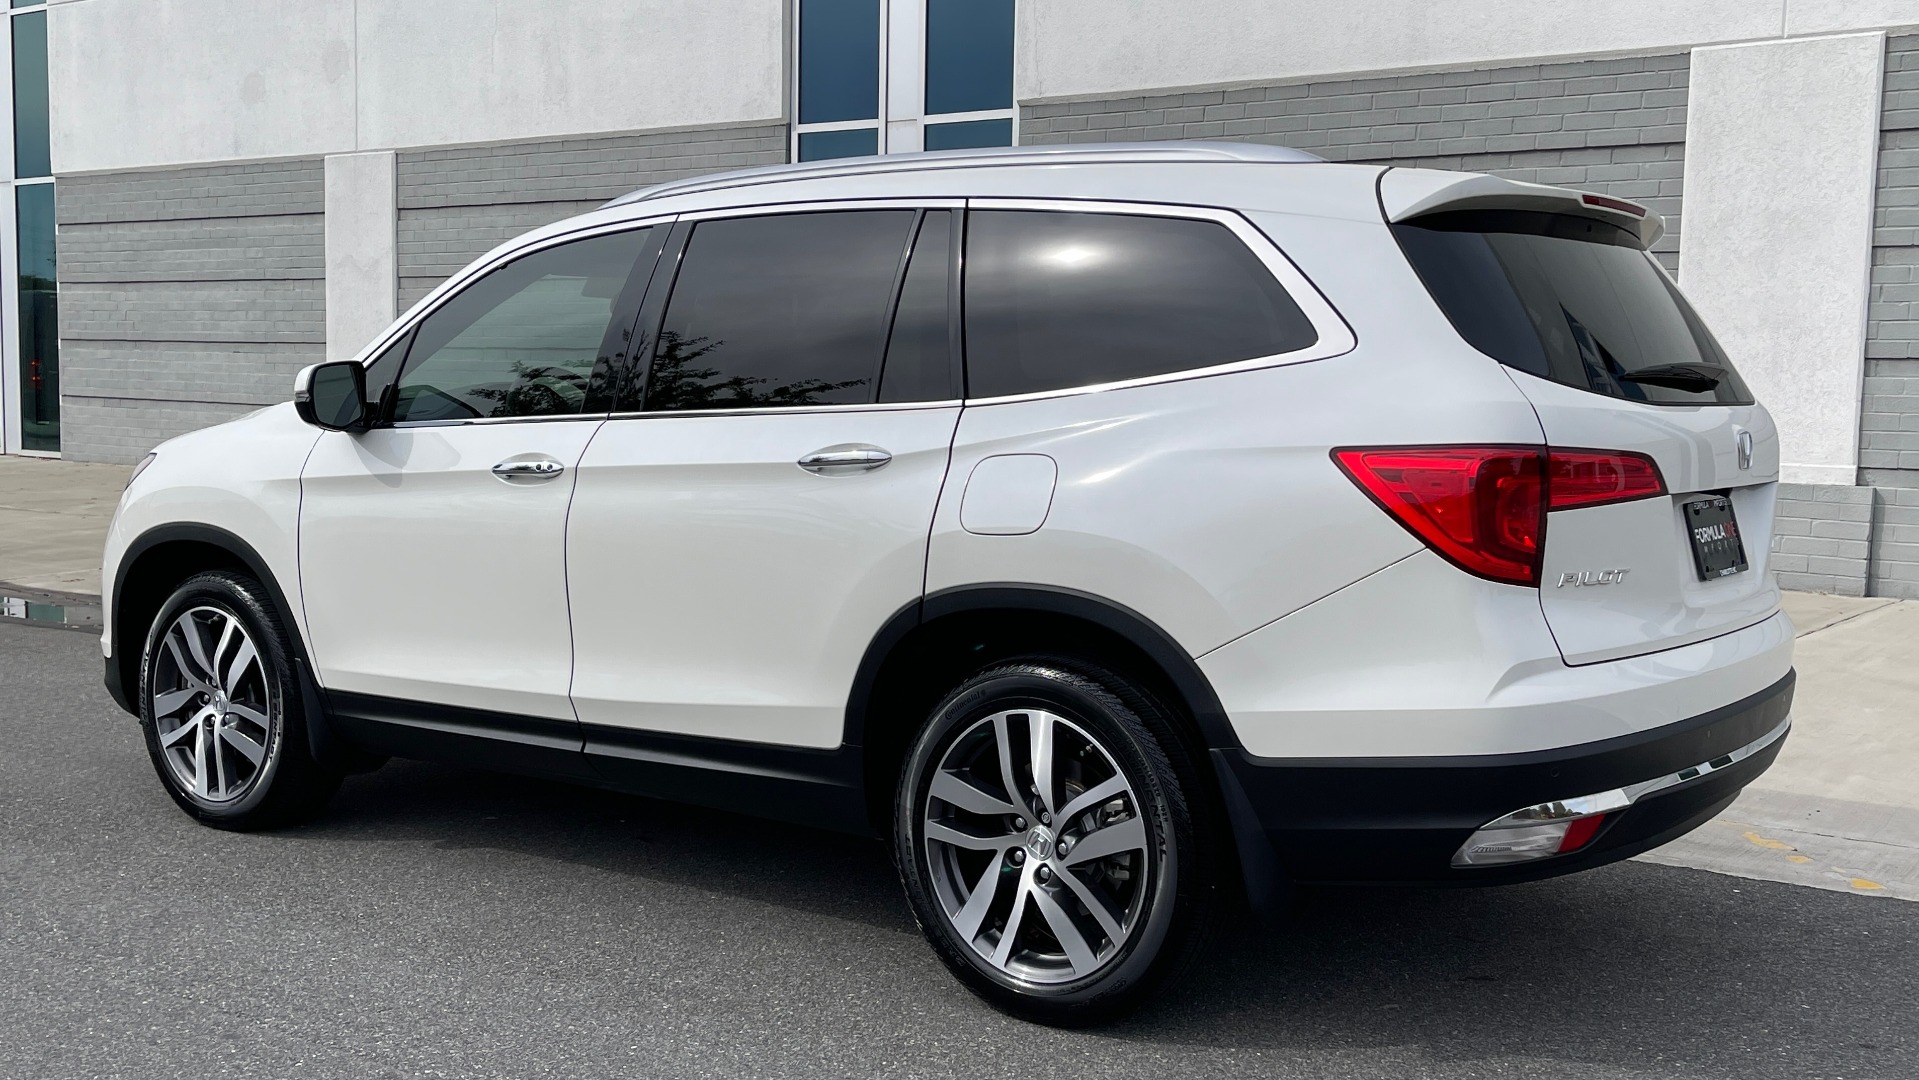 Used 2018 Honda PILOT TOURING AWD / 3.5L V6 / NAV / SUNROOF / 3-ROW / REARVIEW for sale Sold at Formula Imports in Charlotte NC 28227 4